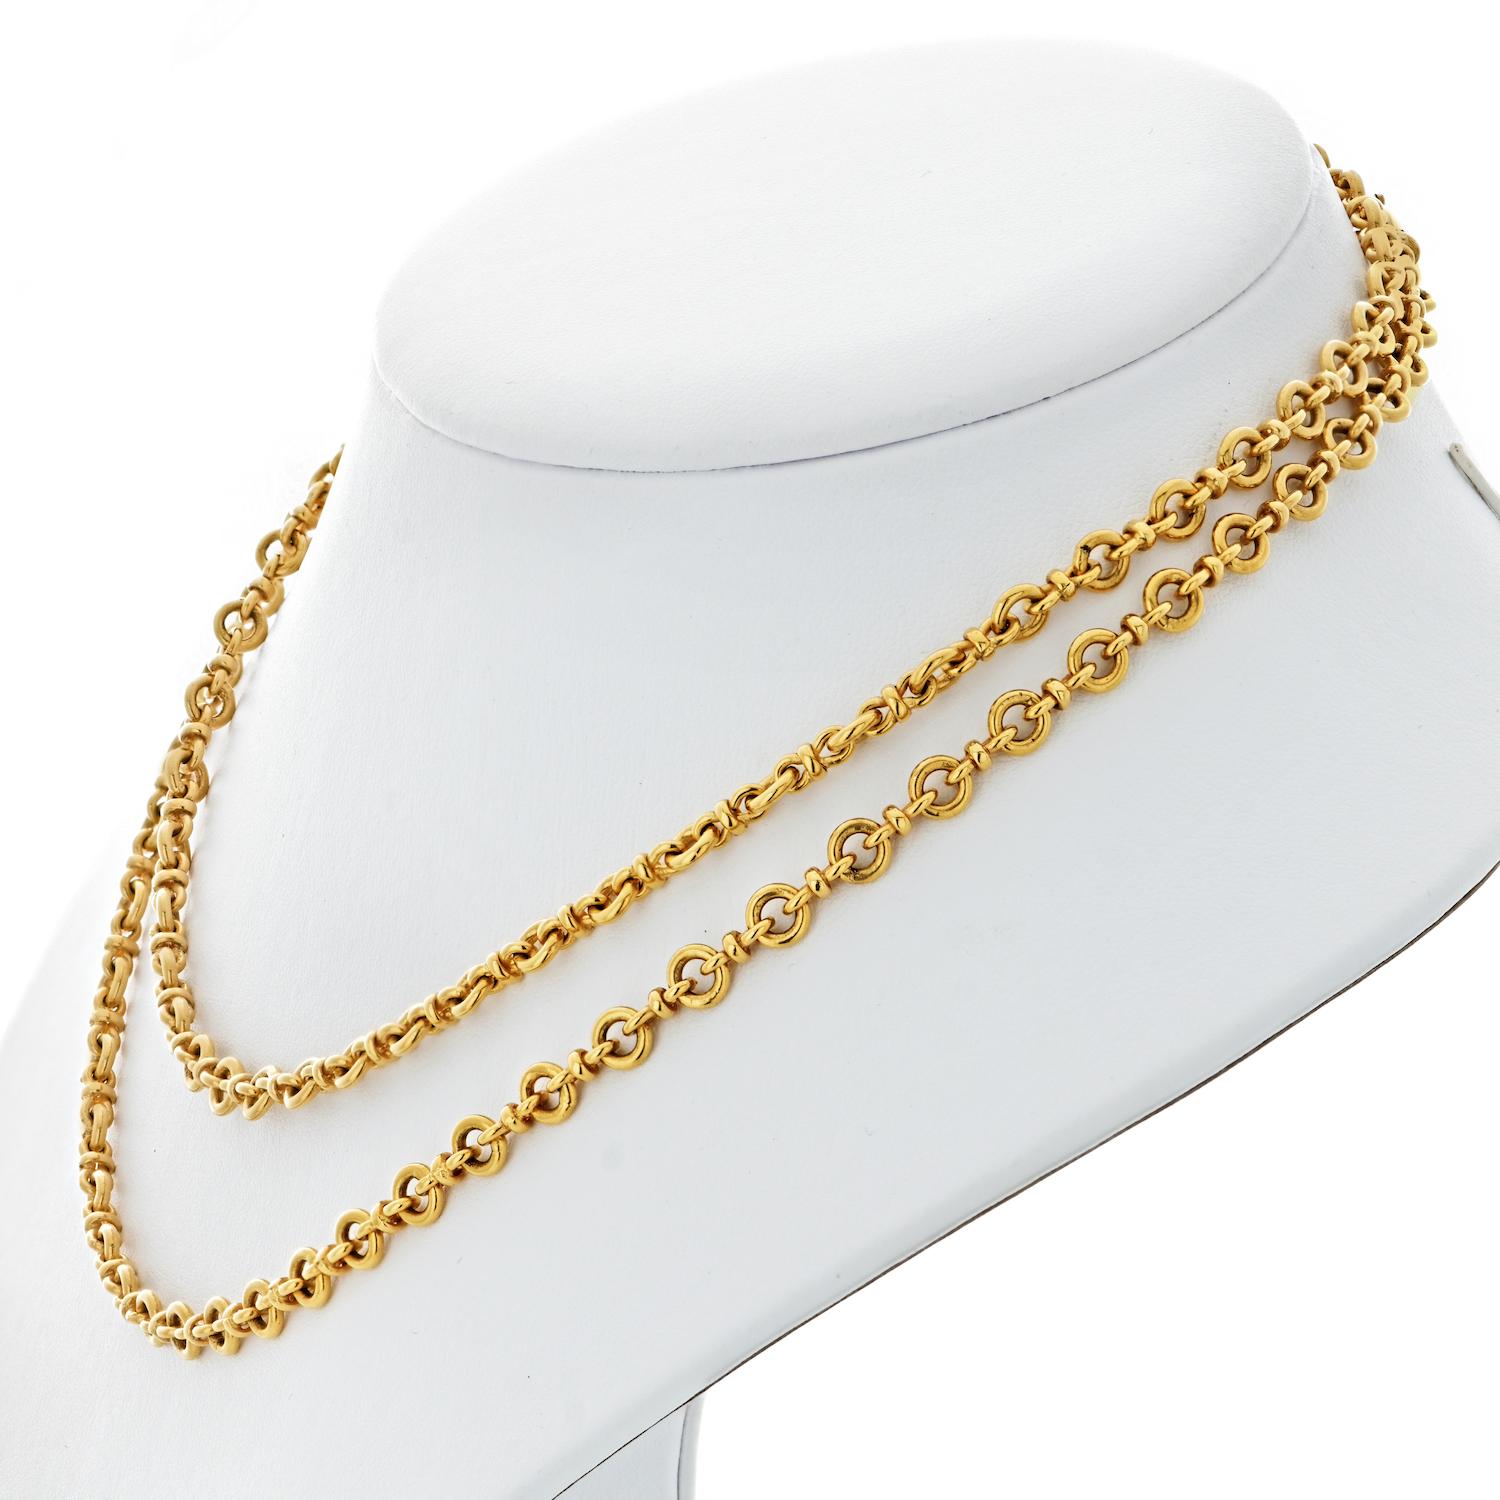 A beautiful vintage string of handmade links by Van Cleef & Arpels crafted in 18k yellow gold. 

31 inches long and is 48 grams. 

A stunning chain that you won't be able to find anywhere else. It is vintage, handmade and it's Van Cleef & Arpels.